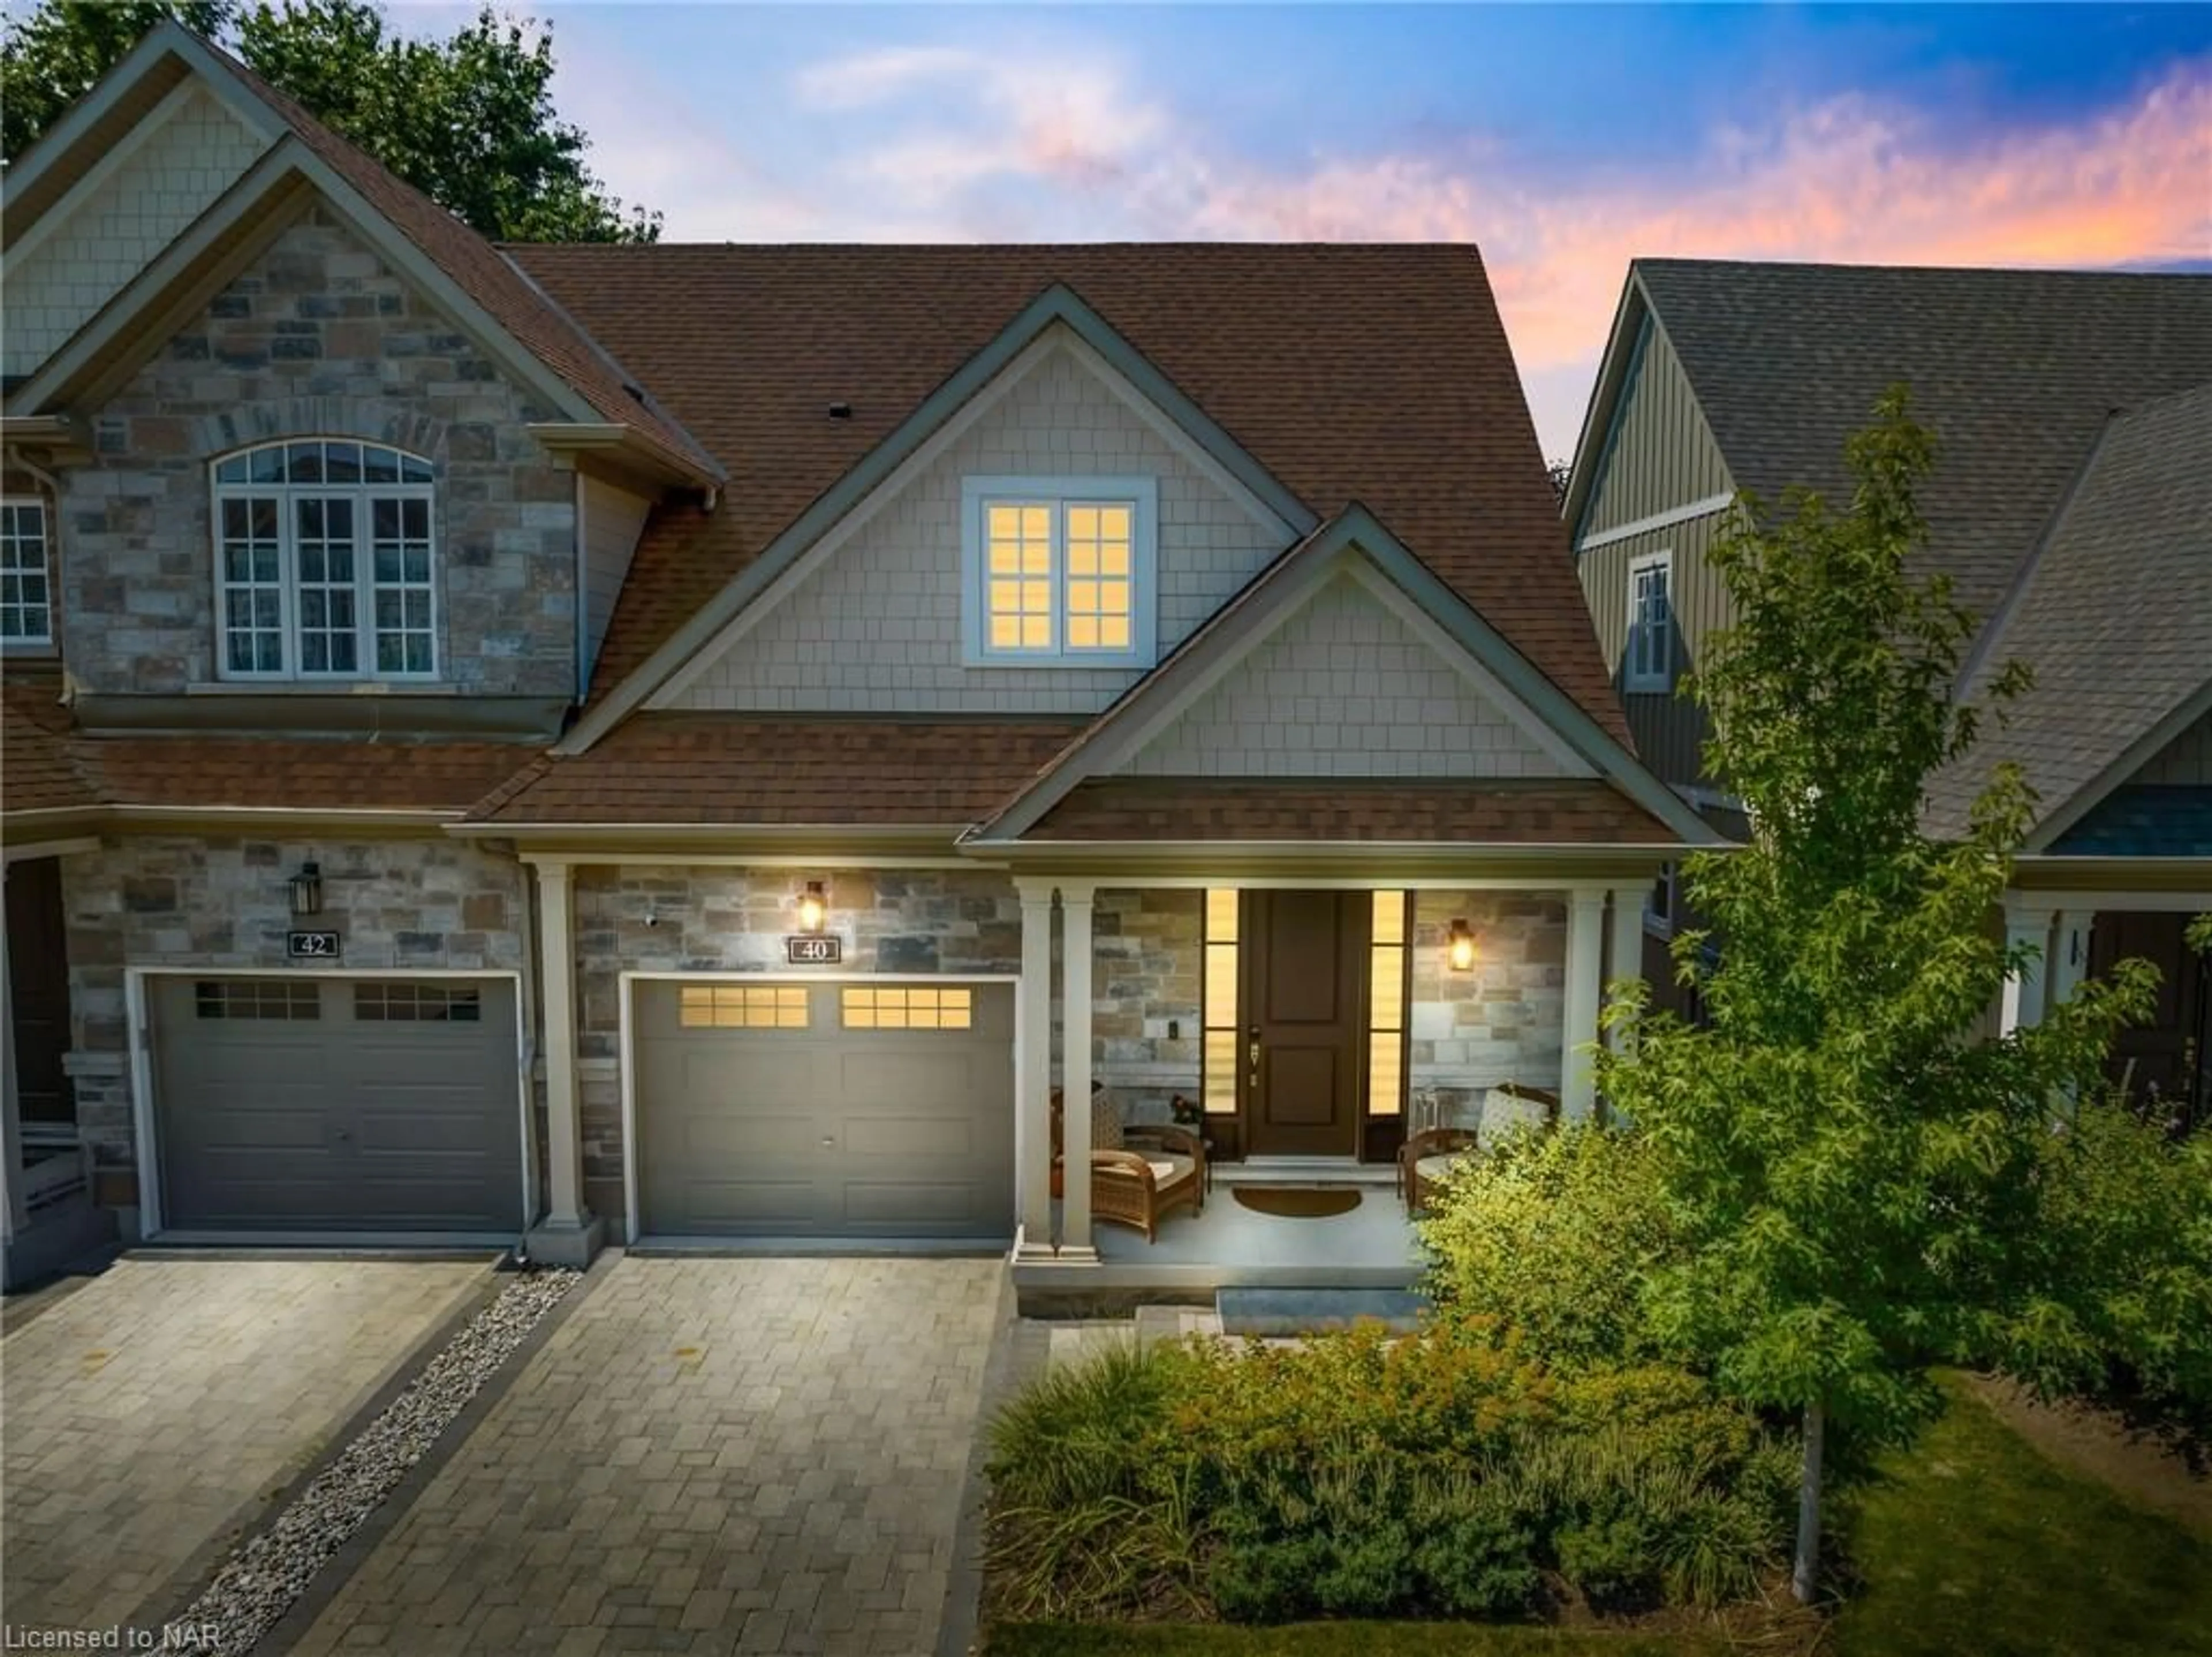 Home with brick exterior material for 40 Windsor Cir, Niagara-on-the-Lake Ontario L0S 1J0